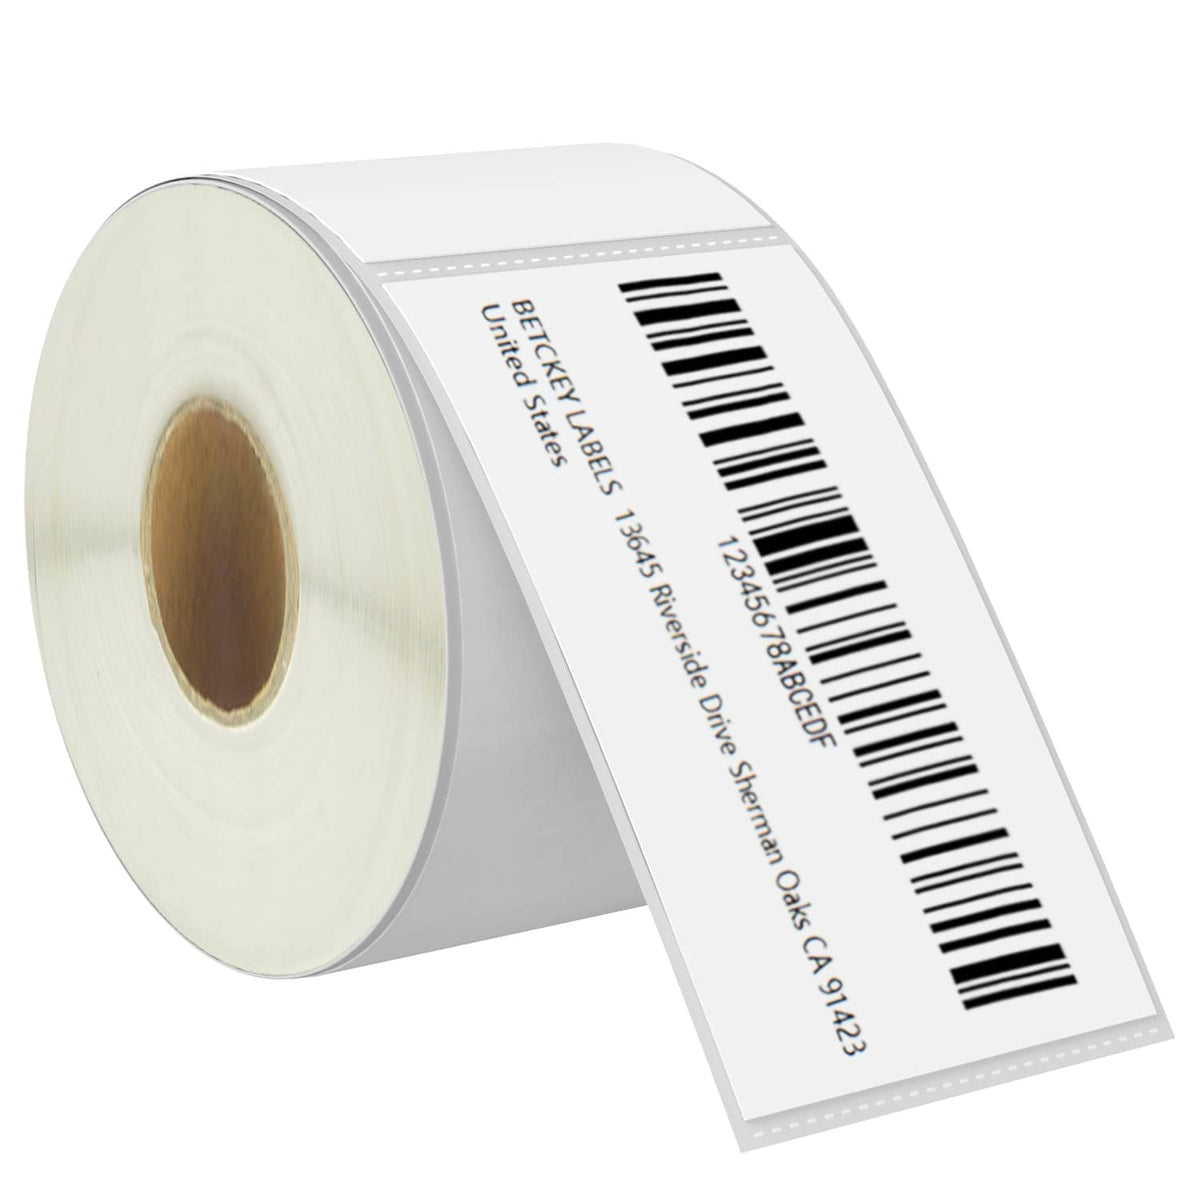 BETCKEY 4" x 6" (102 mm x 152 mm) Blank Shipping Labels Compatible with Zebra ＆ Rollo Label Printer(not for dymo 4XL), Premium Adhesive ＆ Perforat - 2